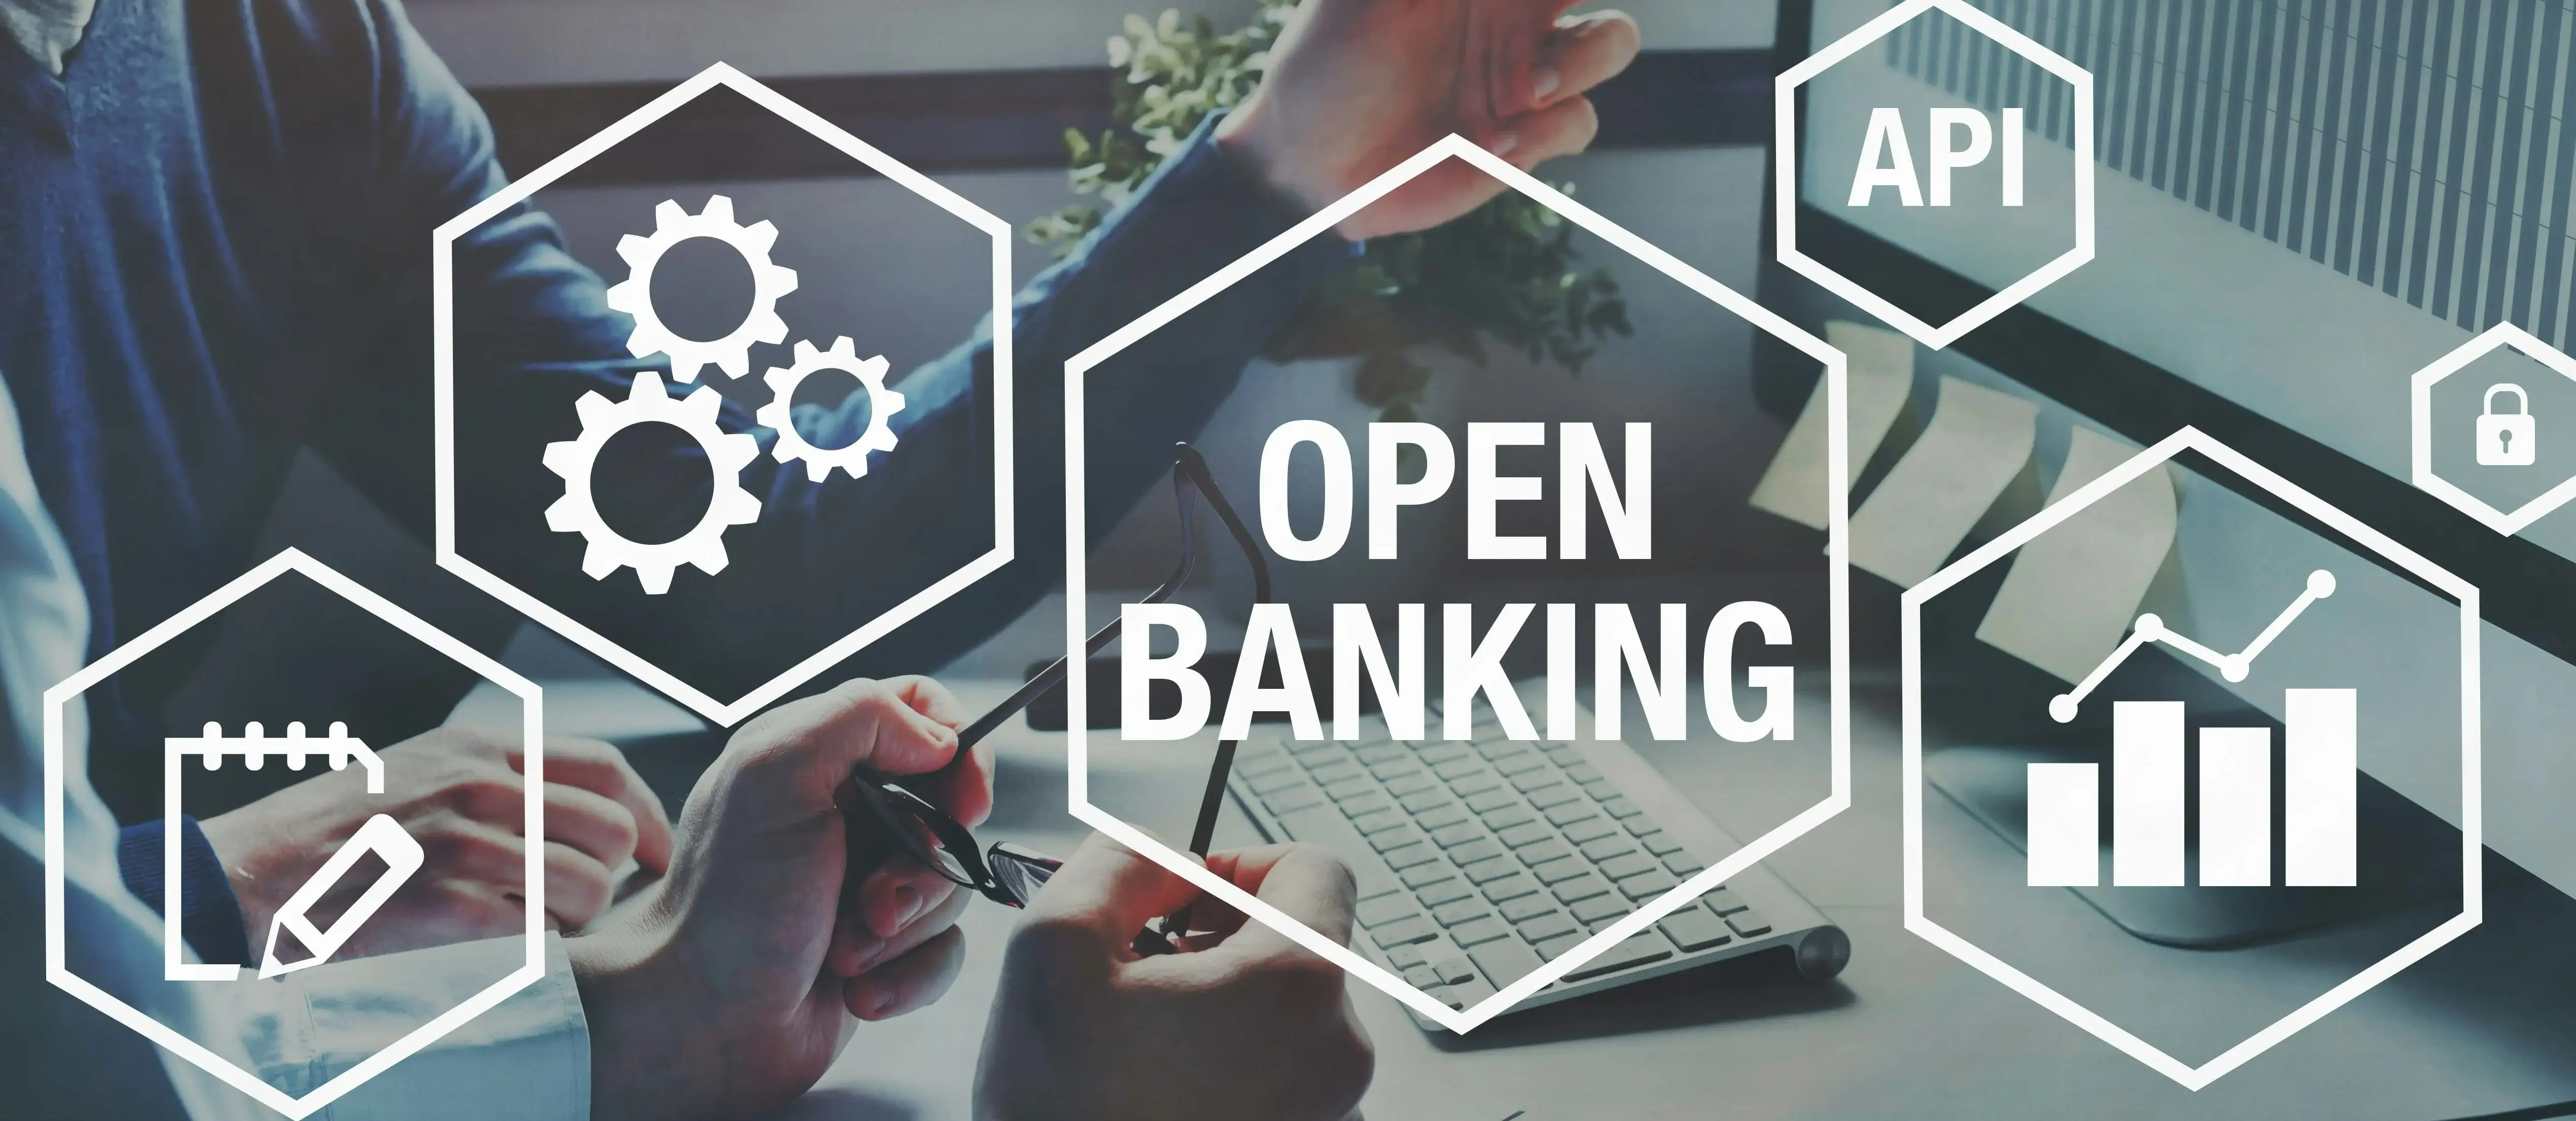 Open banking graphic